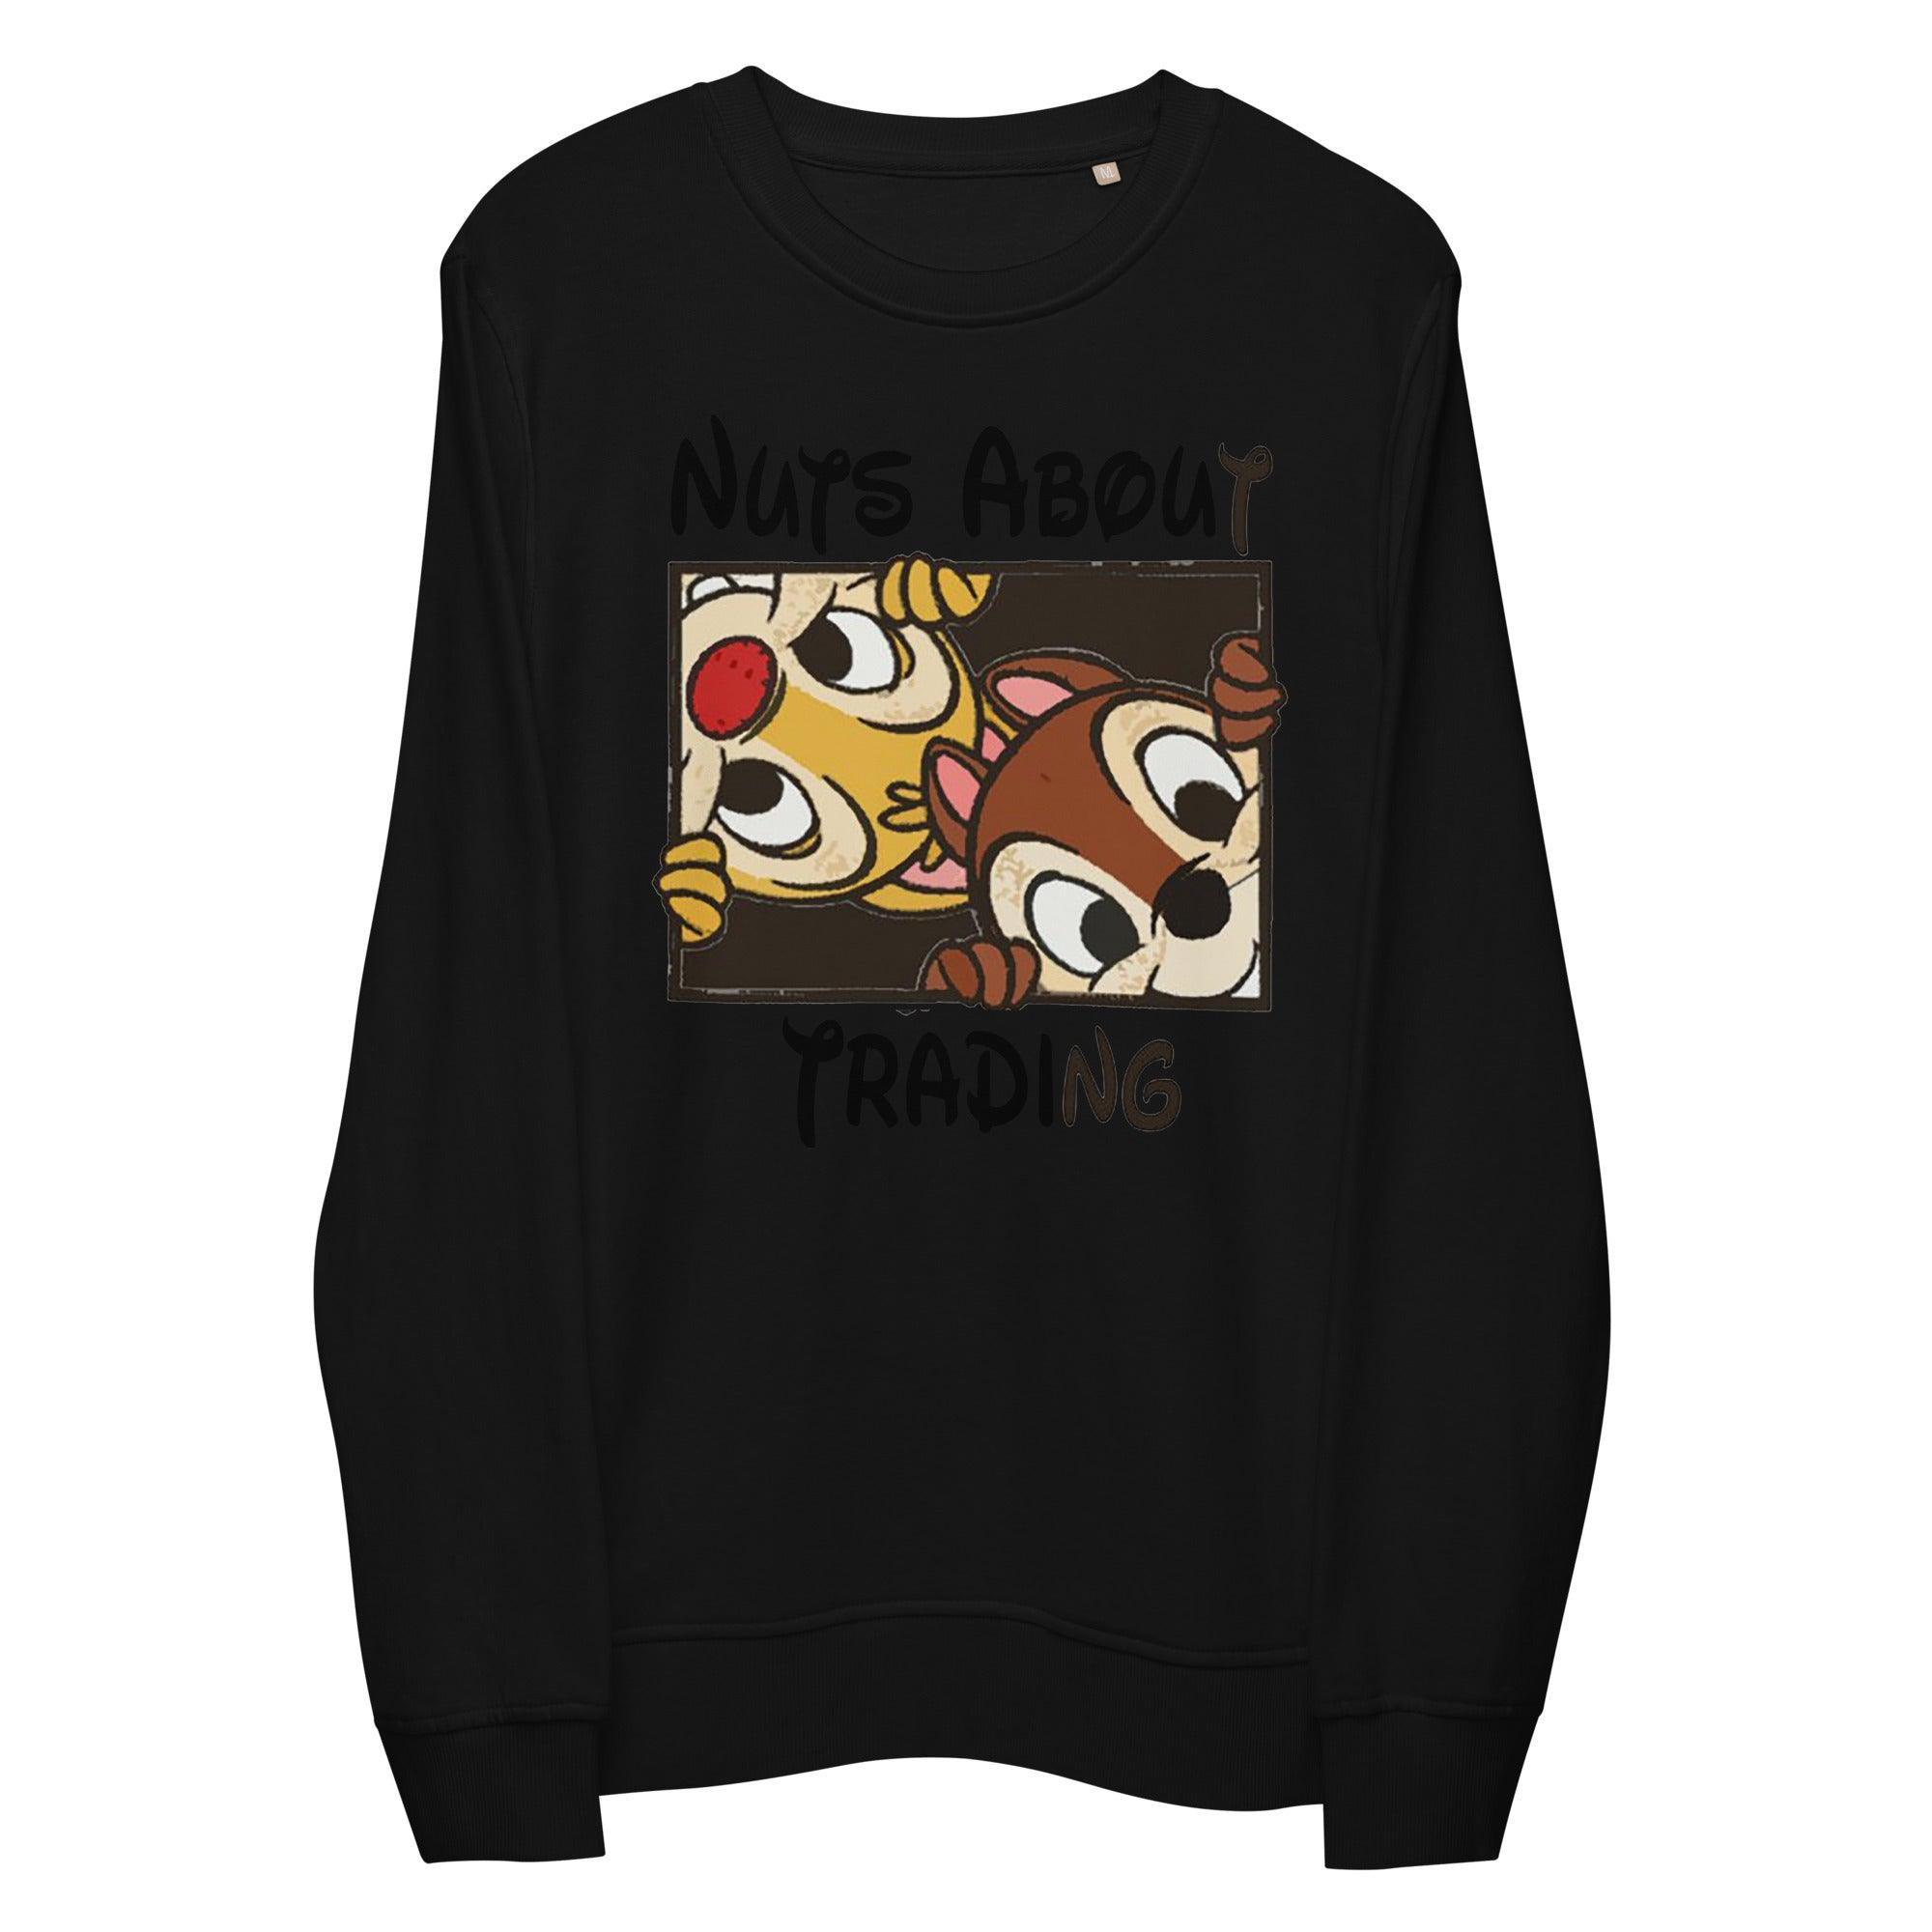 Nuts About Trading Sweatshirt - InvestmenTees